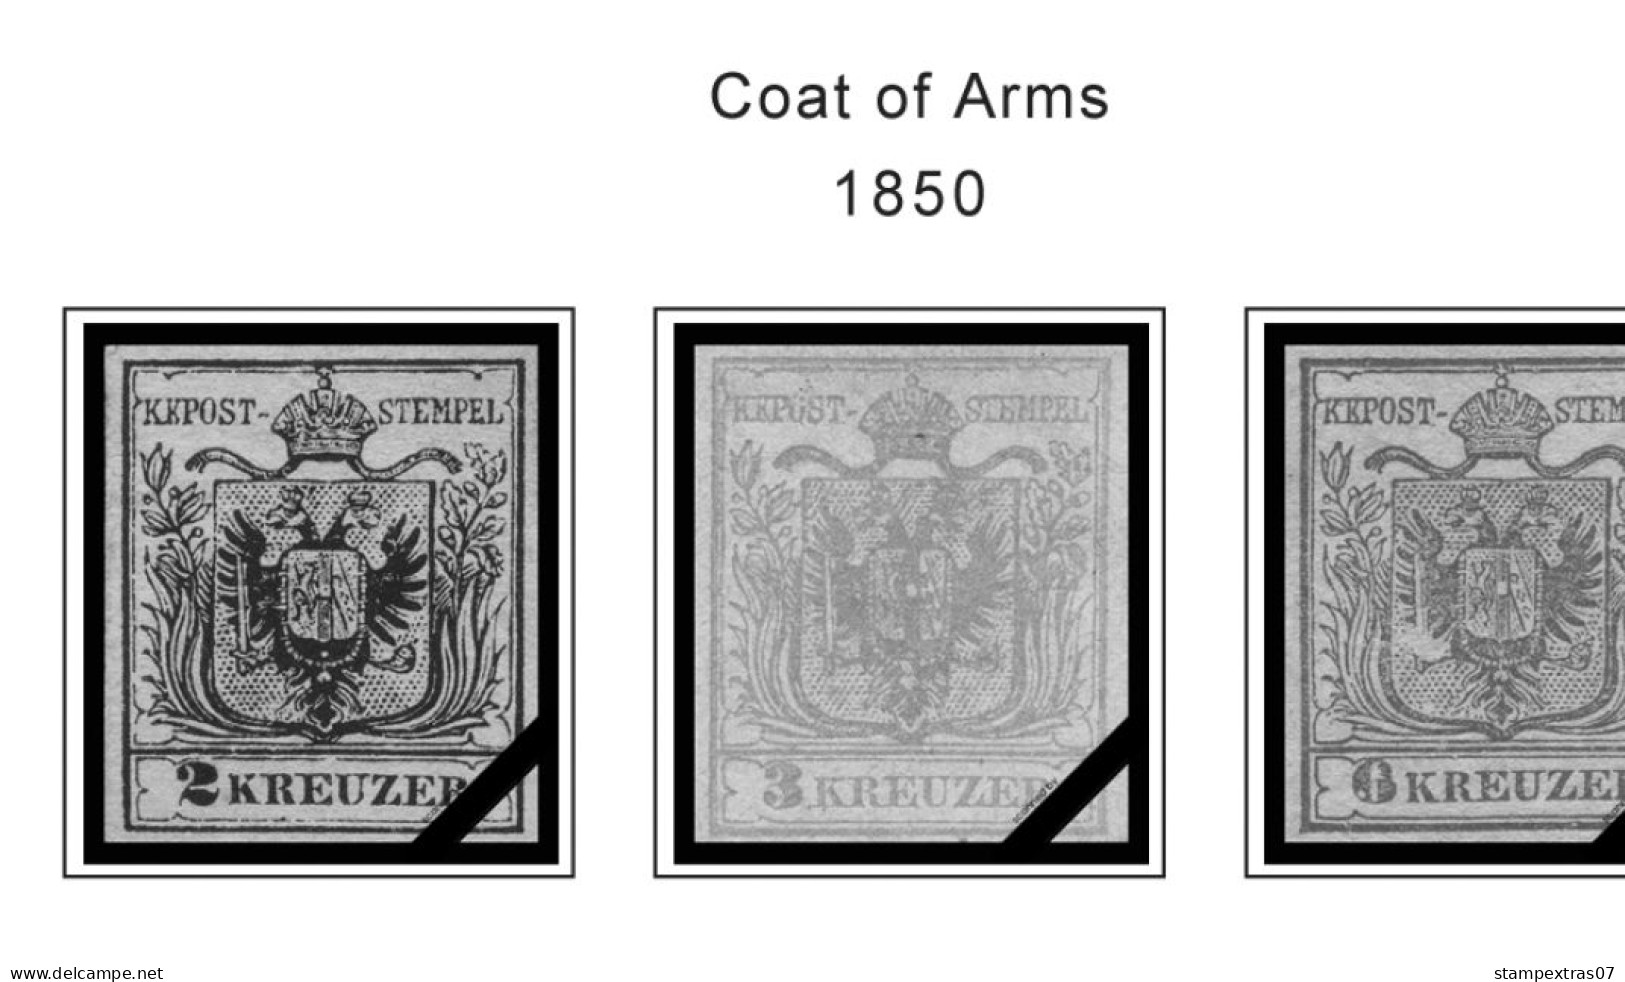 AUSTRIA 1850-2010 + 2011-2020 STAMP ALBUM PAGES (417 B&w Illustrated Pages) - Engels